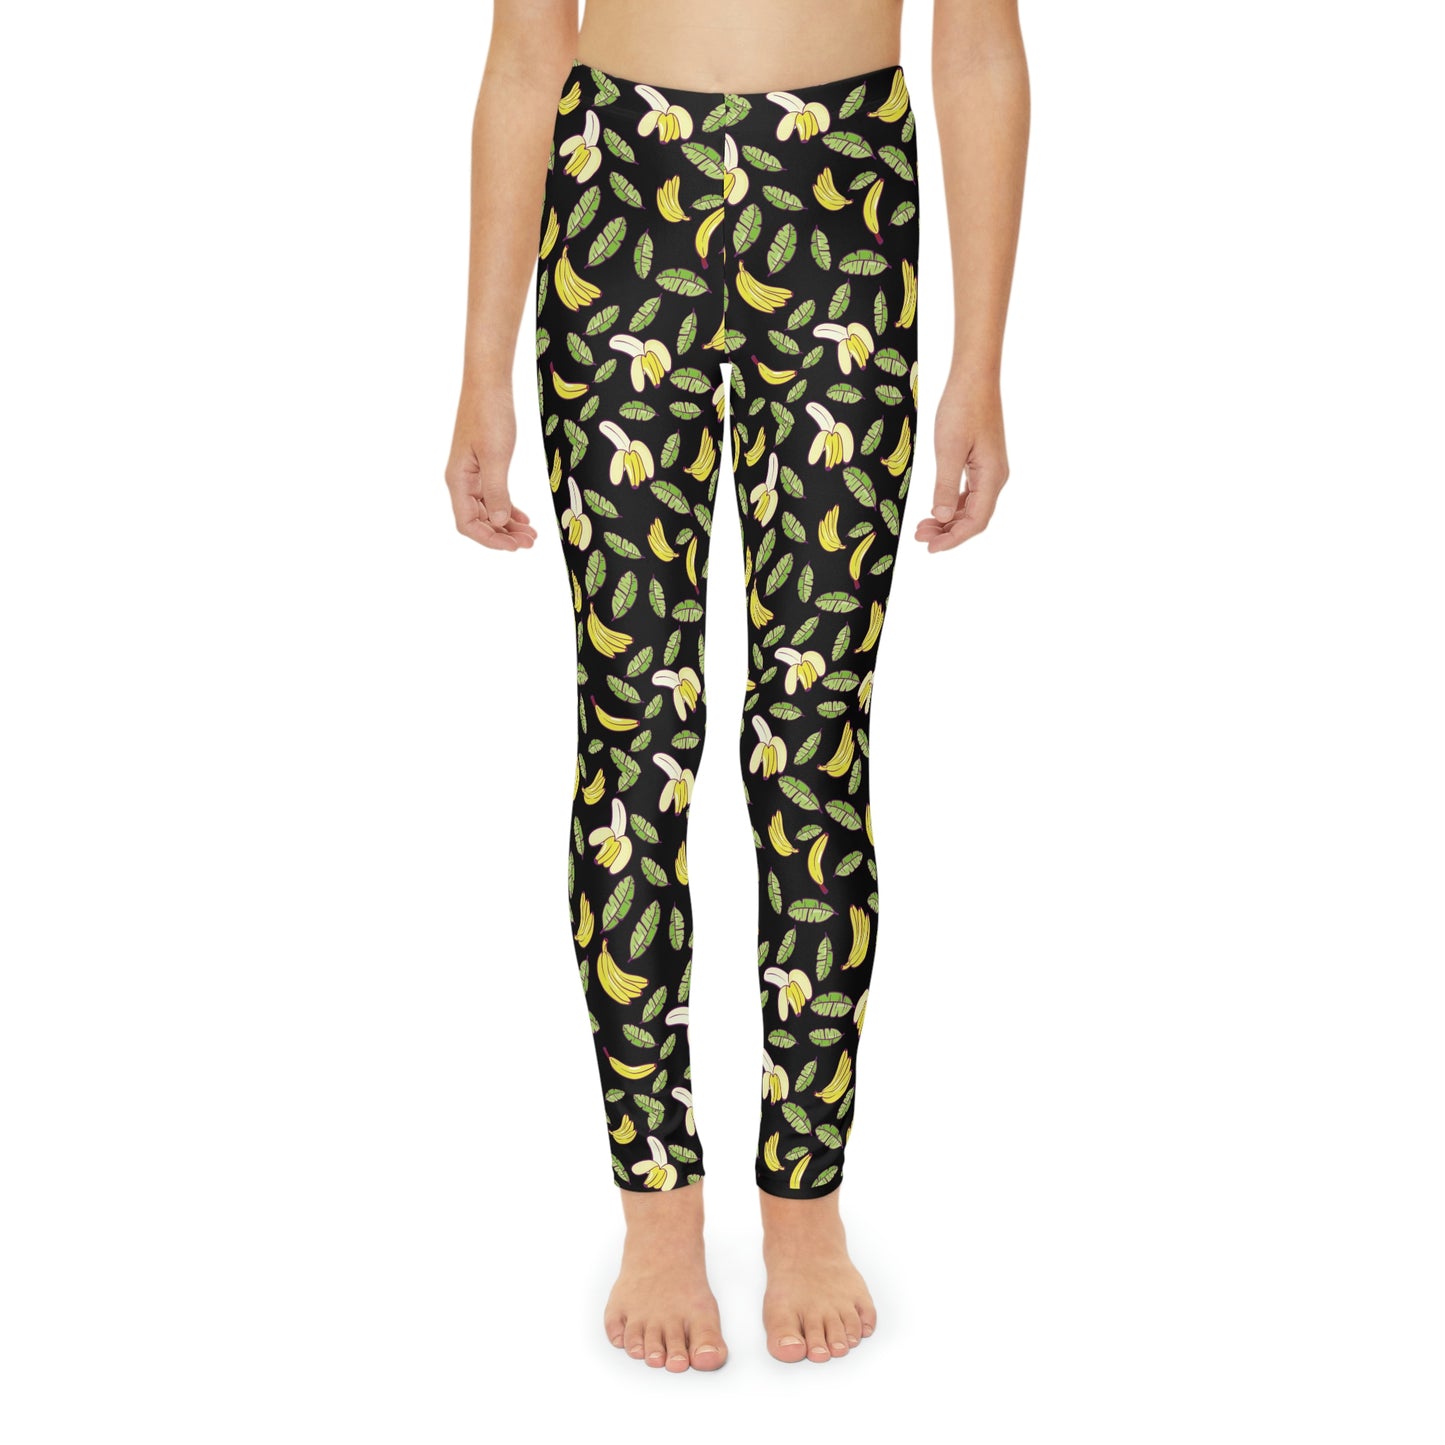 Bananas Print Youth Leggings,  One of a Kind Gift - Unique Workout Activewear tights for  kids Fitness , Daughter, Niece  Christmas Gift